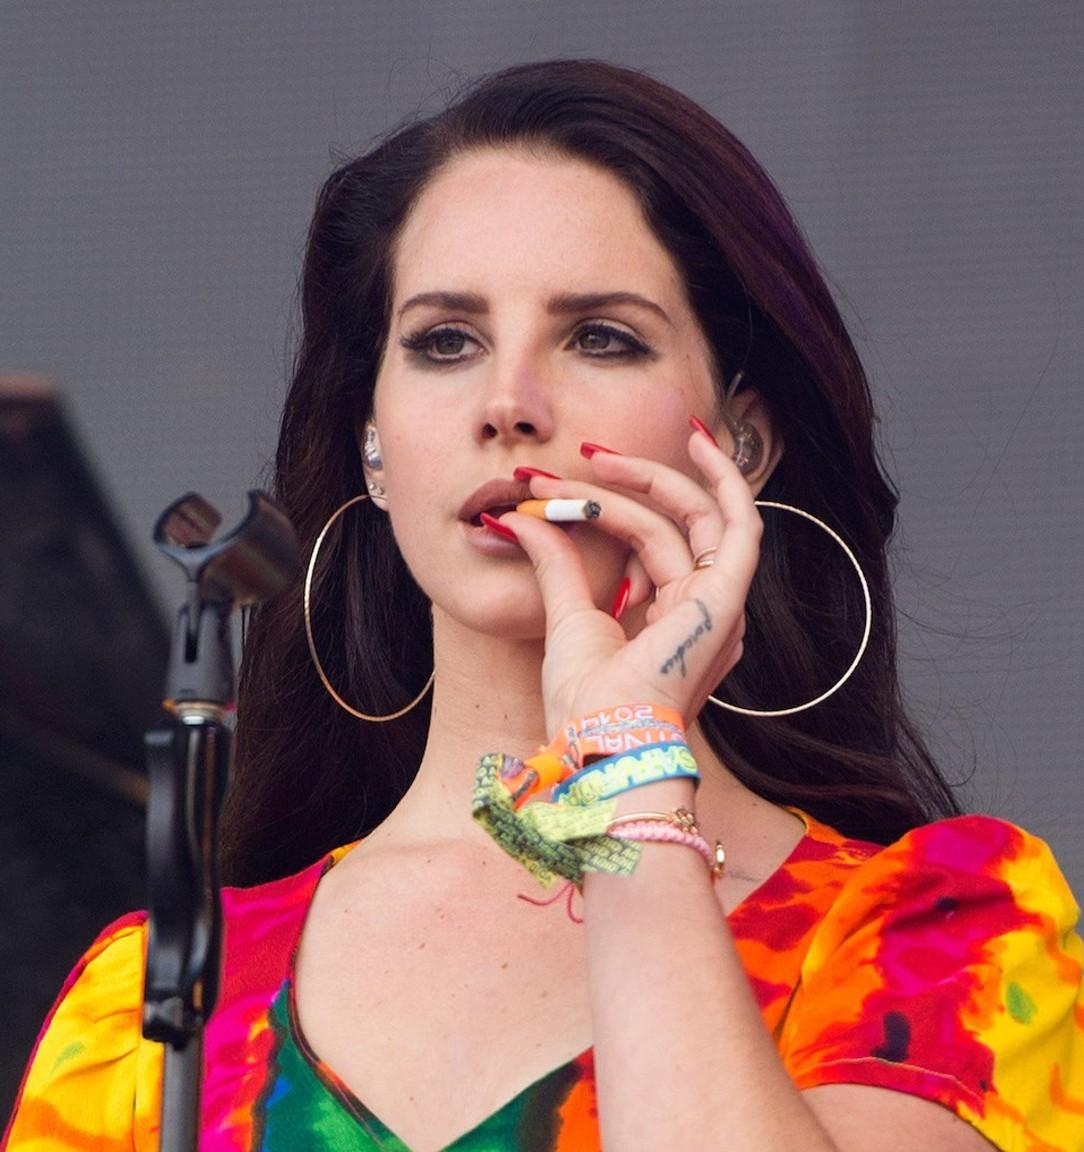 She's Your Man: Something Profoundly Different From Lana Del Rey